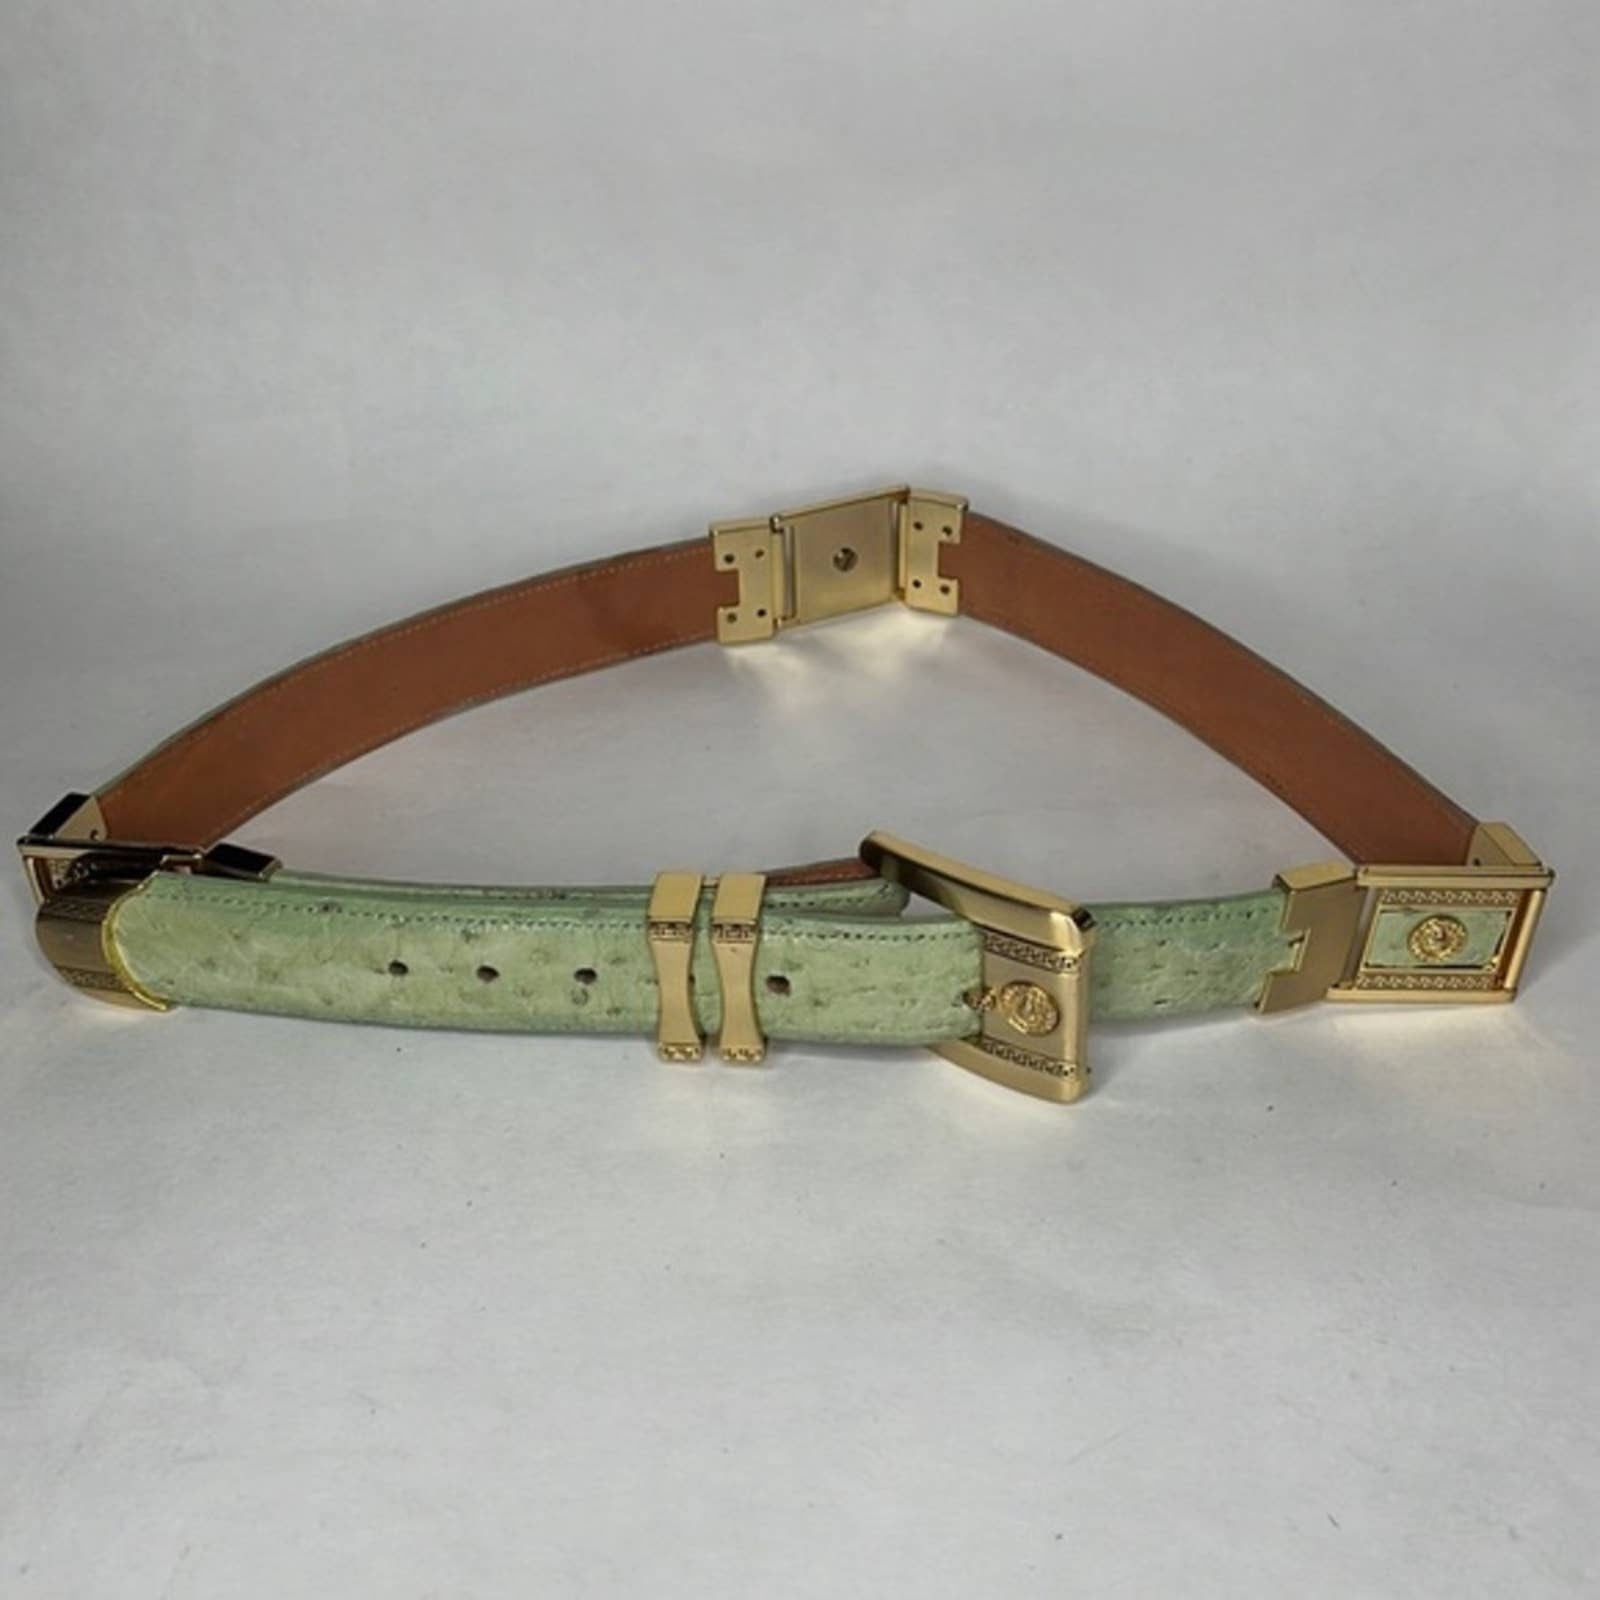 Green ostrich skin replacement leather belt for Hermes buckles